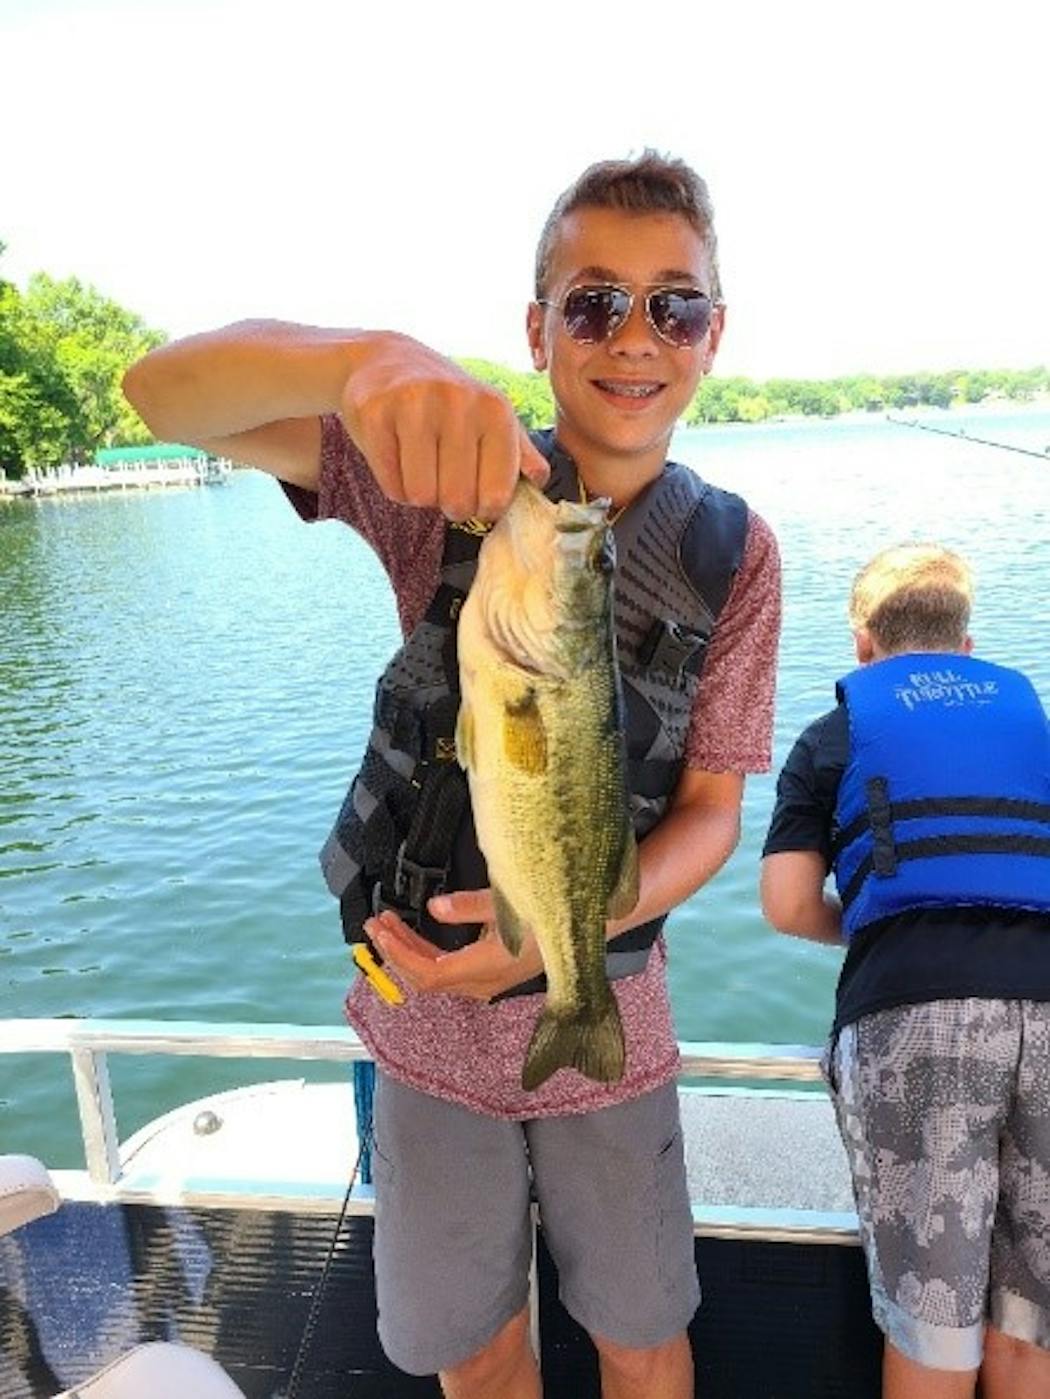 A young participant showed delight as he reeled in a largemouth bass.